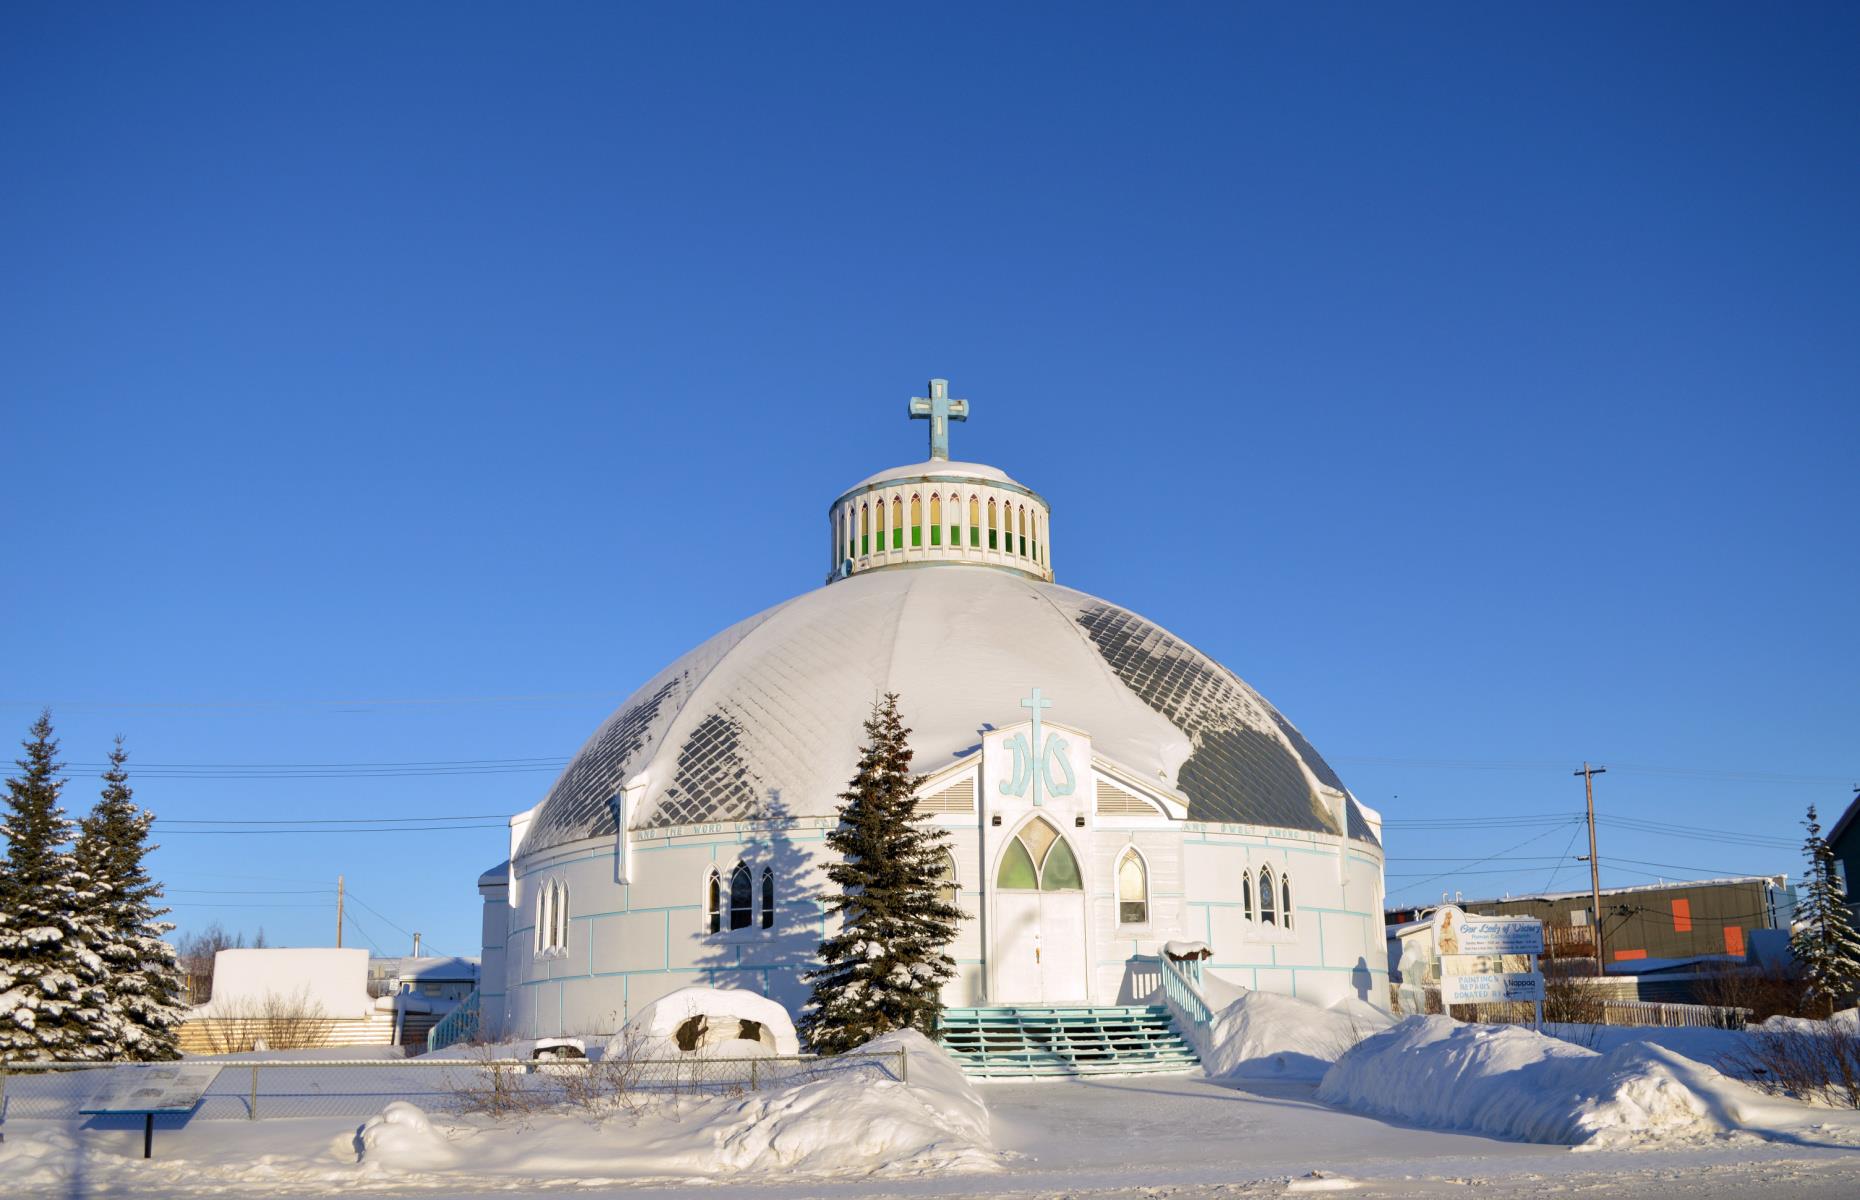 <p>Located well north of the Arctic Circle, it makes sense that the local Catholic church in Inuvik is designed to mimic the shape and look of a snow-covered igloo. Officially known as Our Lady of Victory, the striking exterior of Inuvik’s unique 'igloo church' offers one of the best photo opportunities in this northern community. Tours of the interior are also available during the summer months.</p>